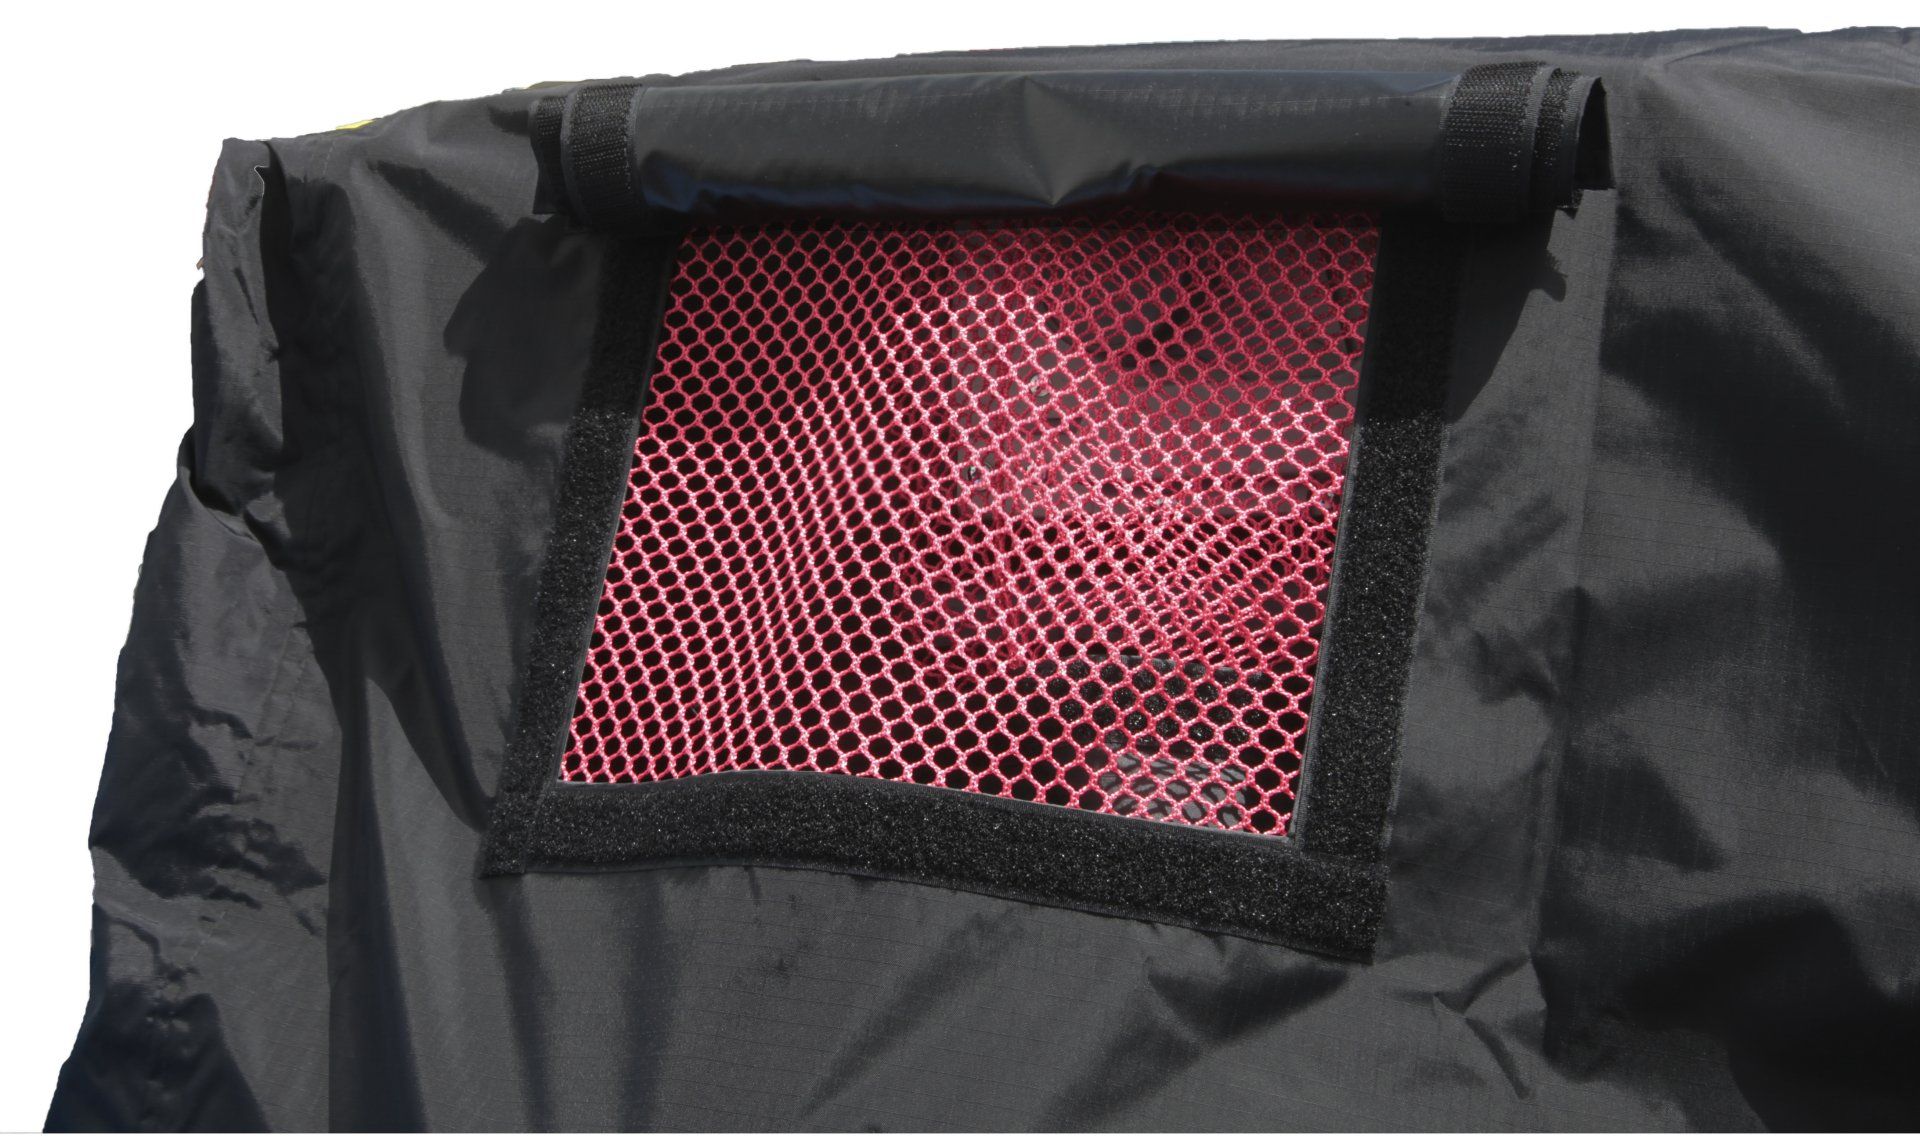 The Vent Open on the  S7 Overnight Elephant Bag.